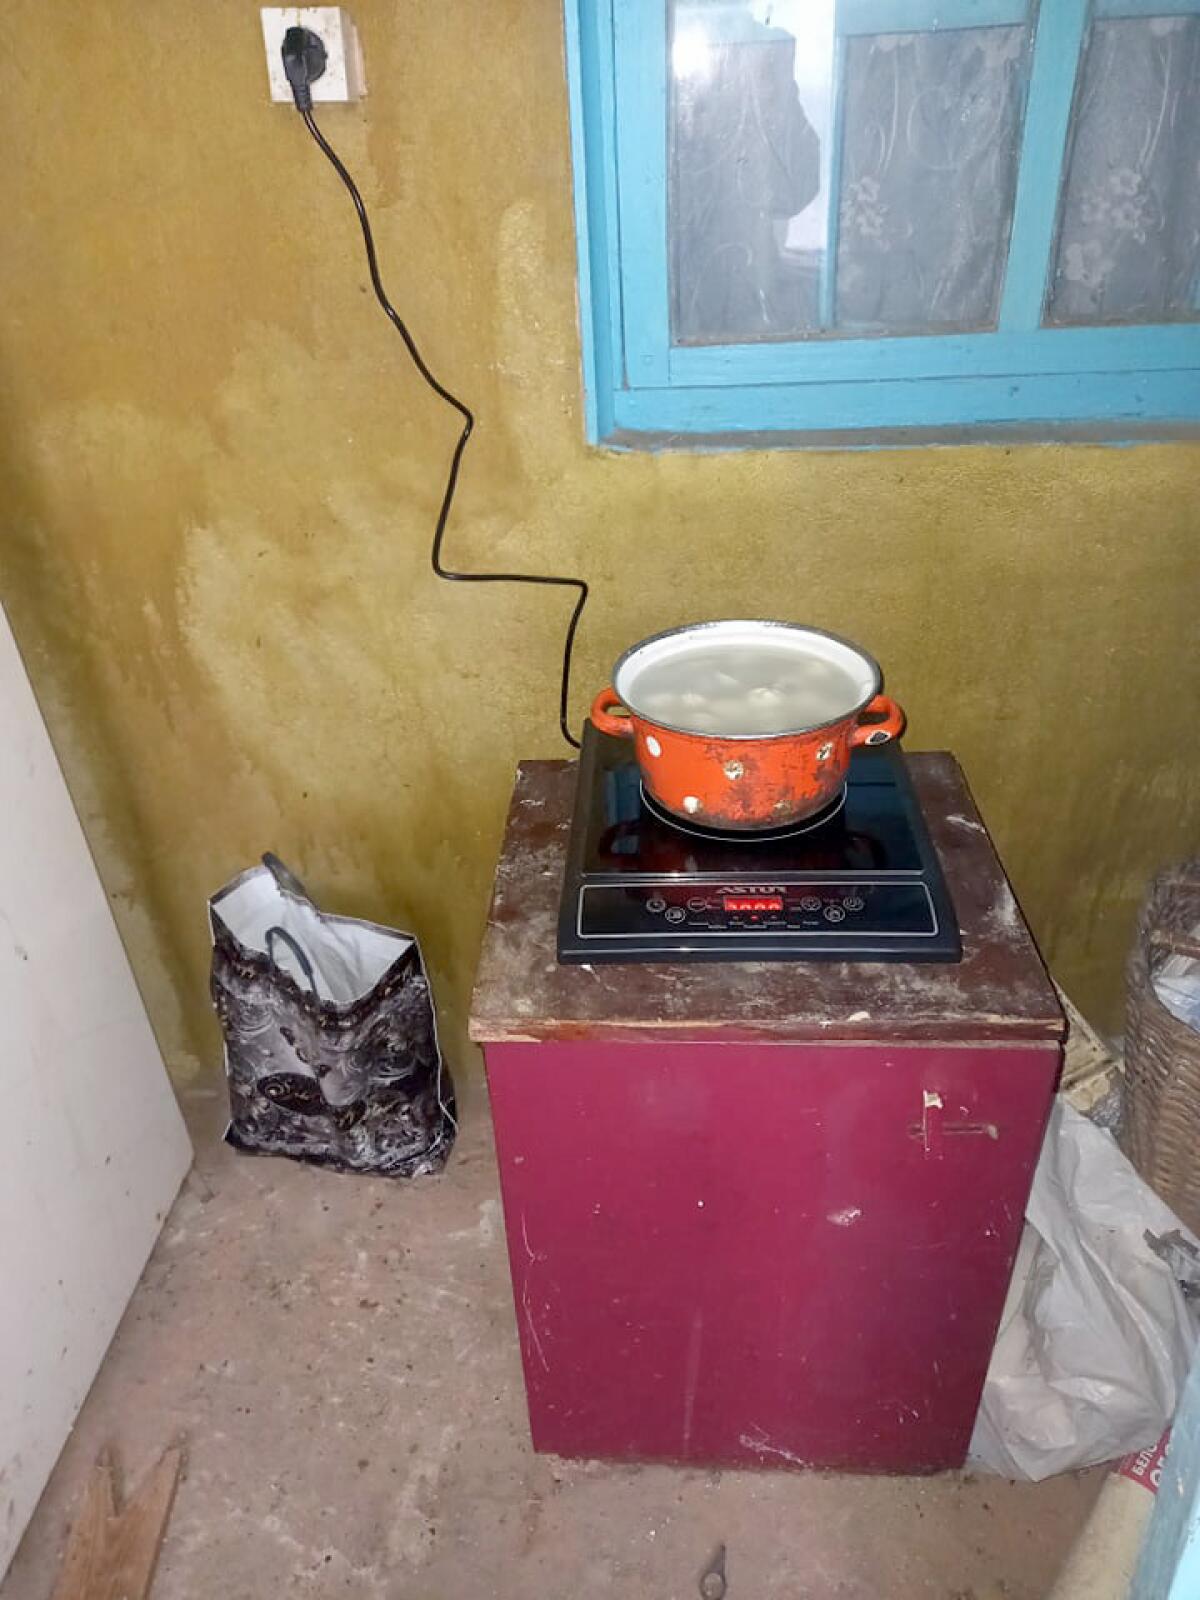 Tatyana purchased an electric stove so she could prepare meals for her family in the shelter.